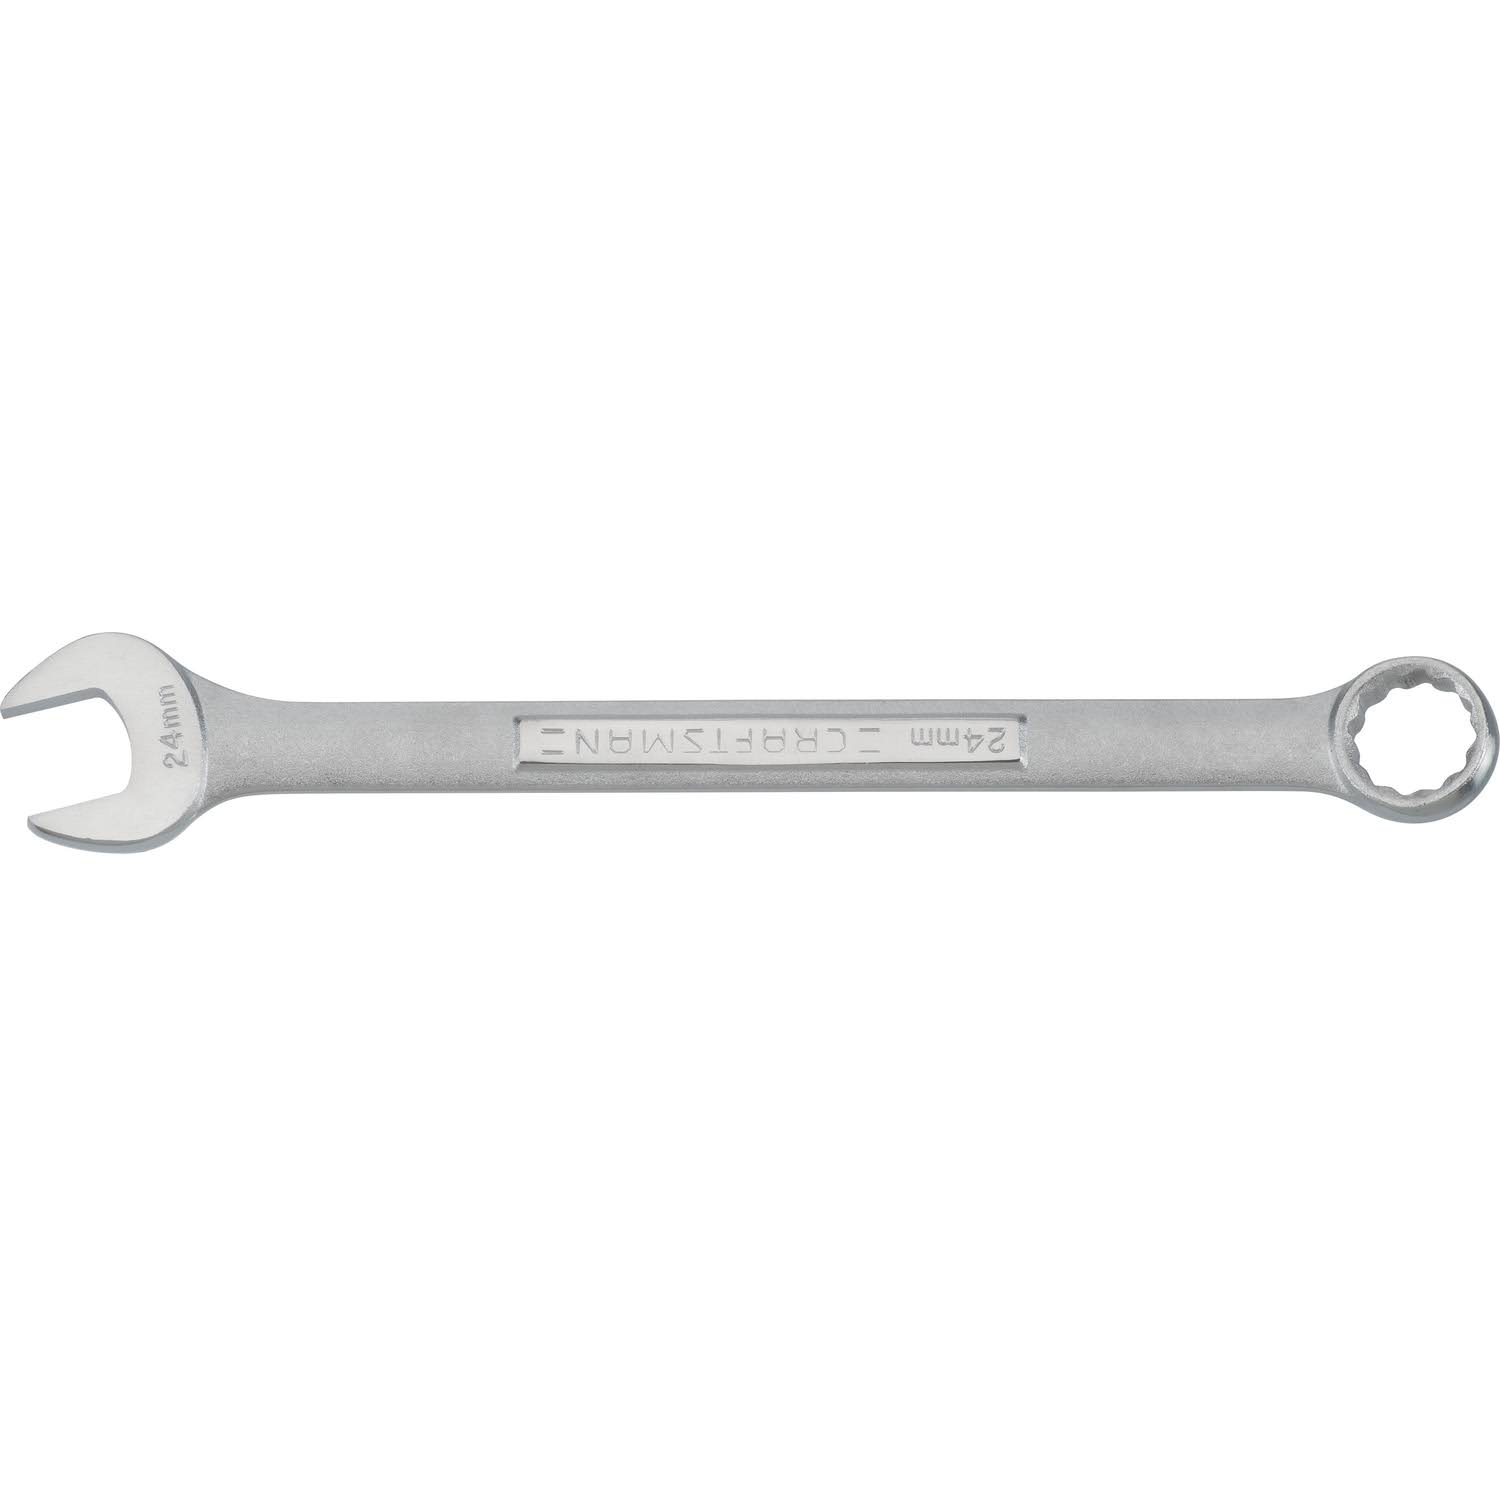 Craftsman Cmmt42923 12 Point Metric Combination Wrench, 24mm